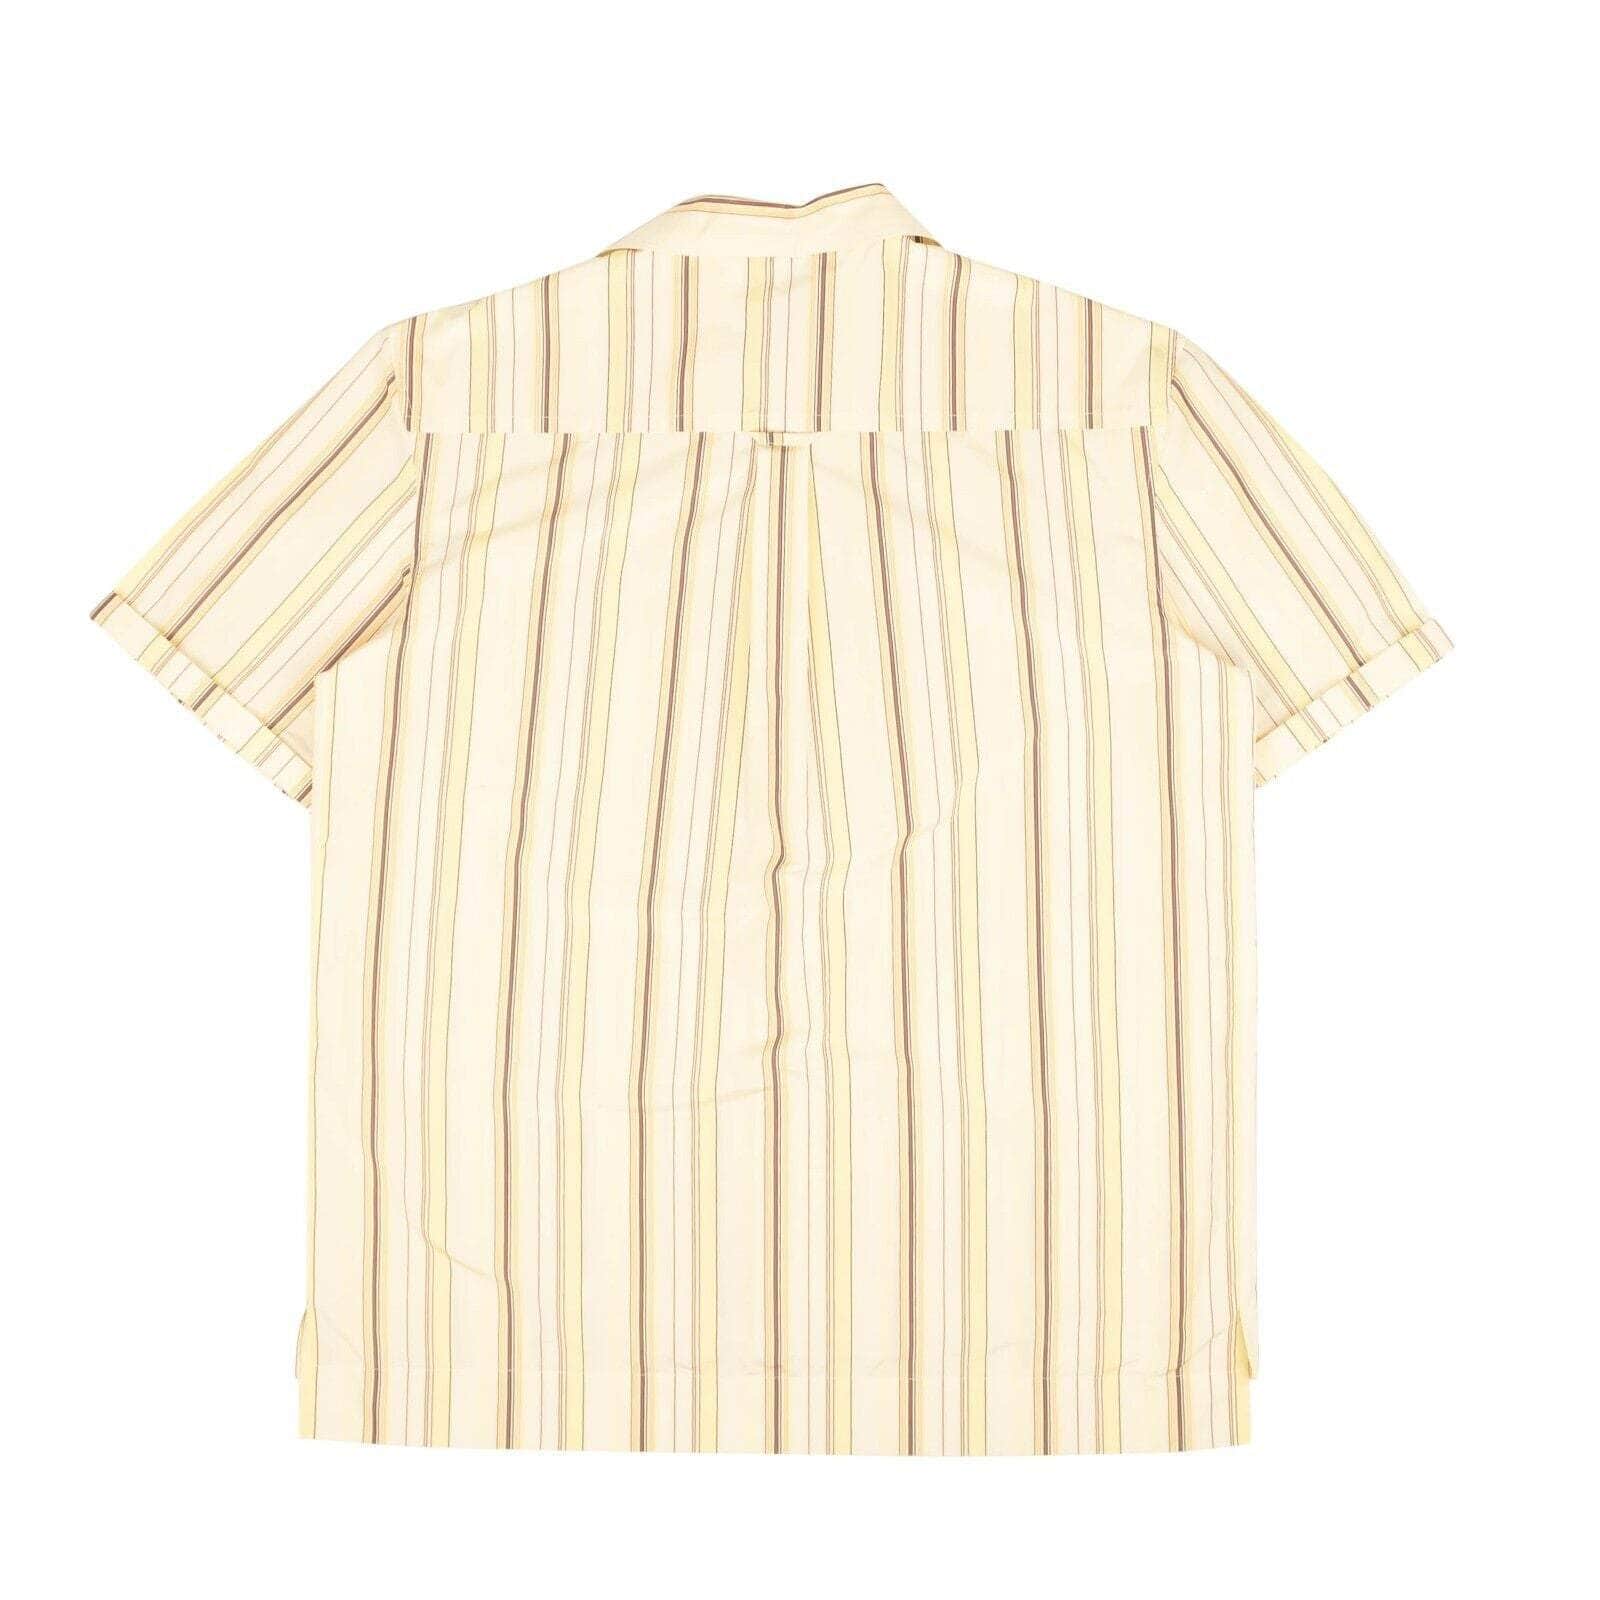 Wales Bonner 250-500, channelenable-all, chicmi, couponcollection, gender-mens, main-clothing, mens-shoes, size-48, size-50, size-52, wales-bonner 48 Pale Yellow Tobacco Havana Short Sleeve Shirt 95-WBR-1006/48 95-WBR-1006/48